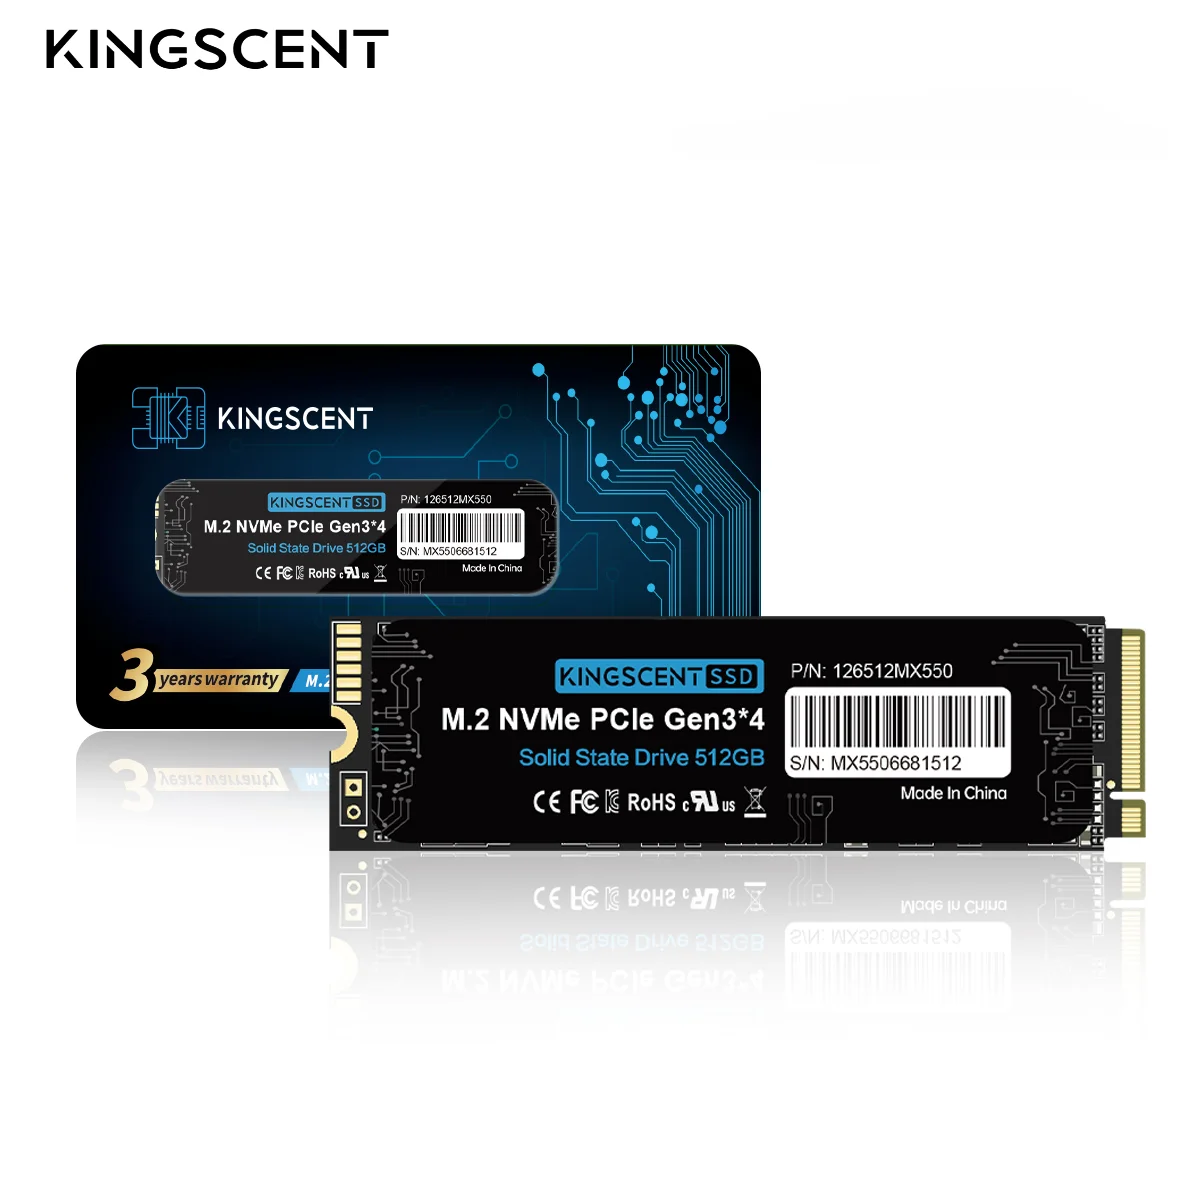 Hot Kingscent Ssd Nvme M2 1tb 512gb 256gb 128gb HDD SSD M.2 2280 2tb Computer Internal Solid State Drive for Desktop Laptop MSI images - 6